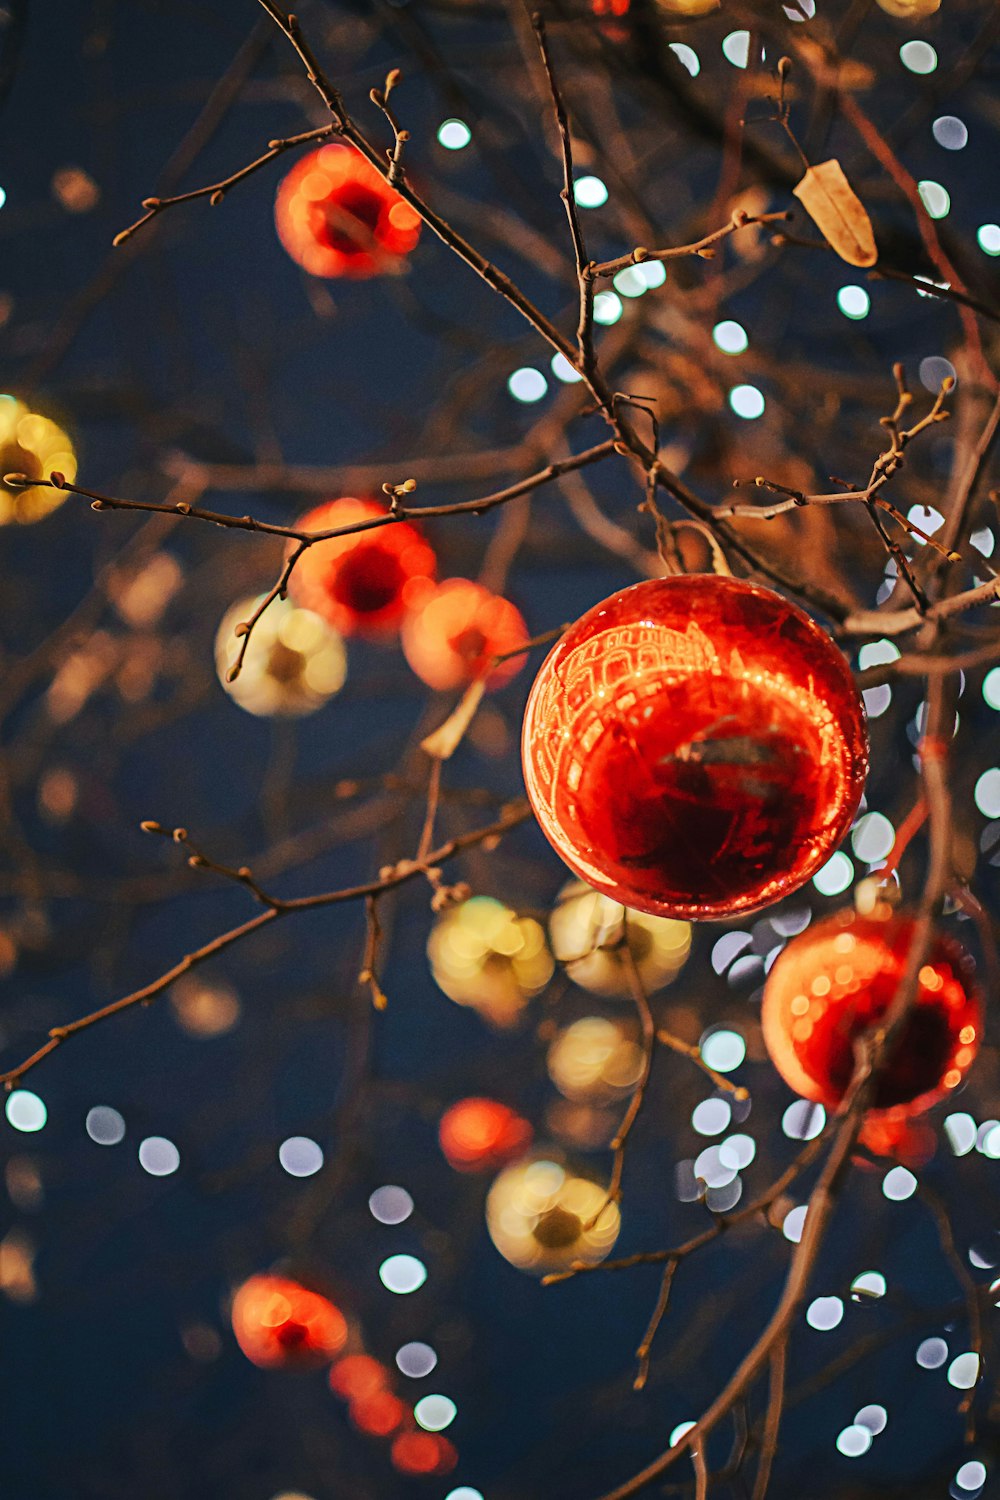 a red ornament hanging from a tree with lights in the background